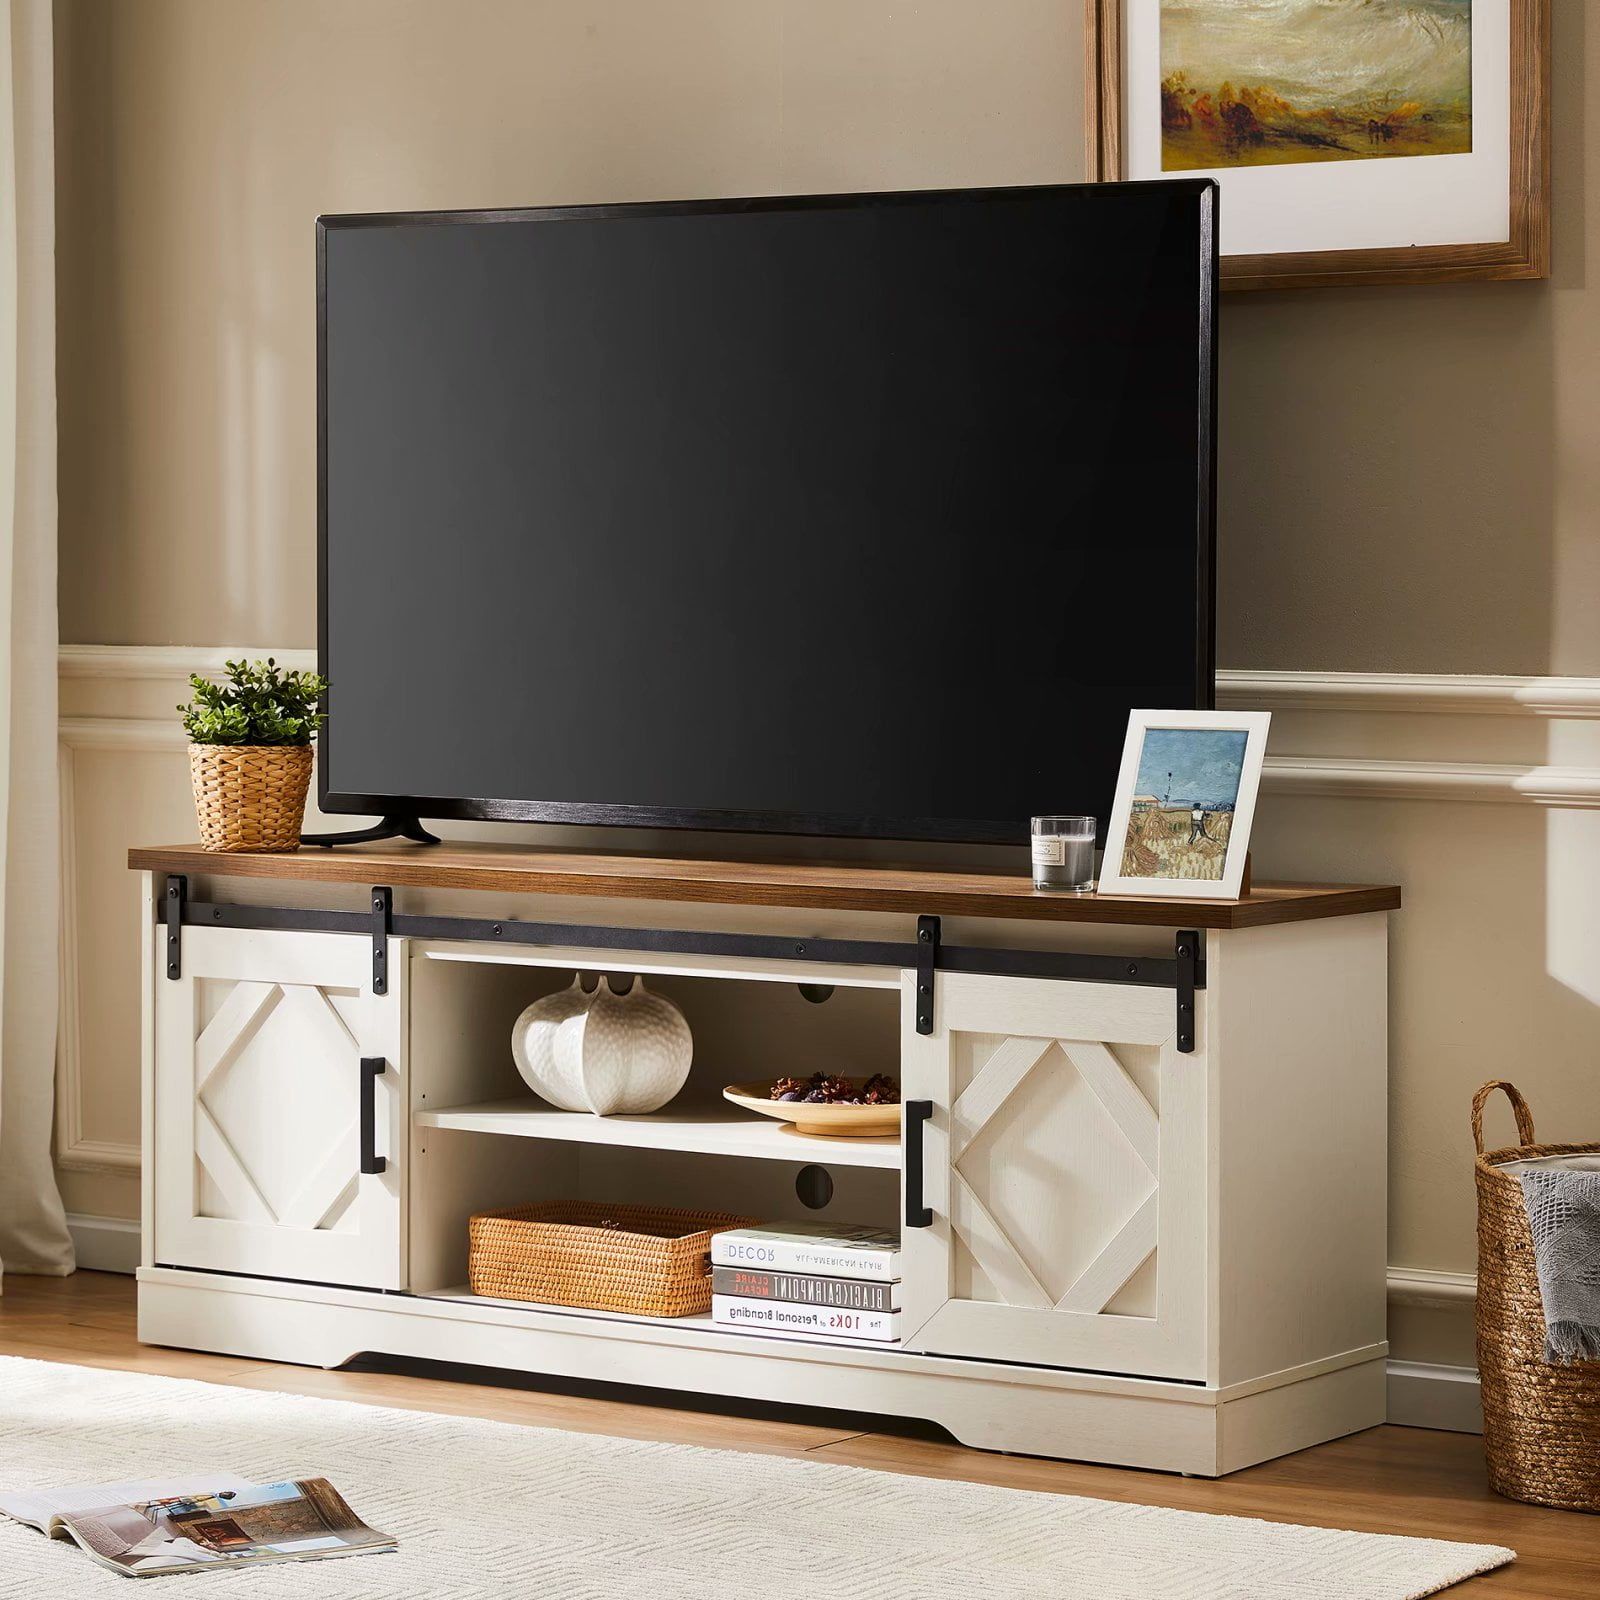 Farmhouse Tv Stand For Tv Up To 65", Sliding Barn Door Entertainment Inside Barn Door Media Tv Stands (Gallery 20 of 20)